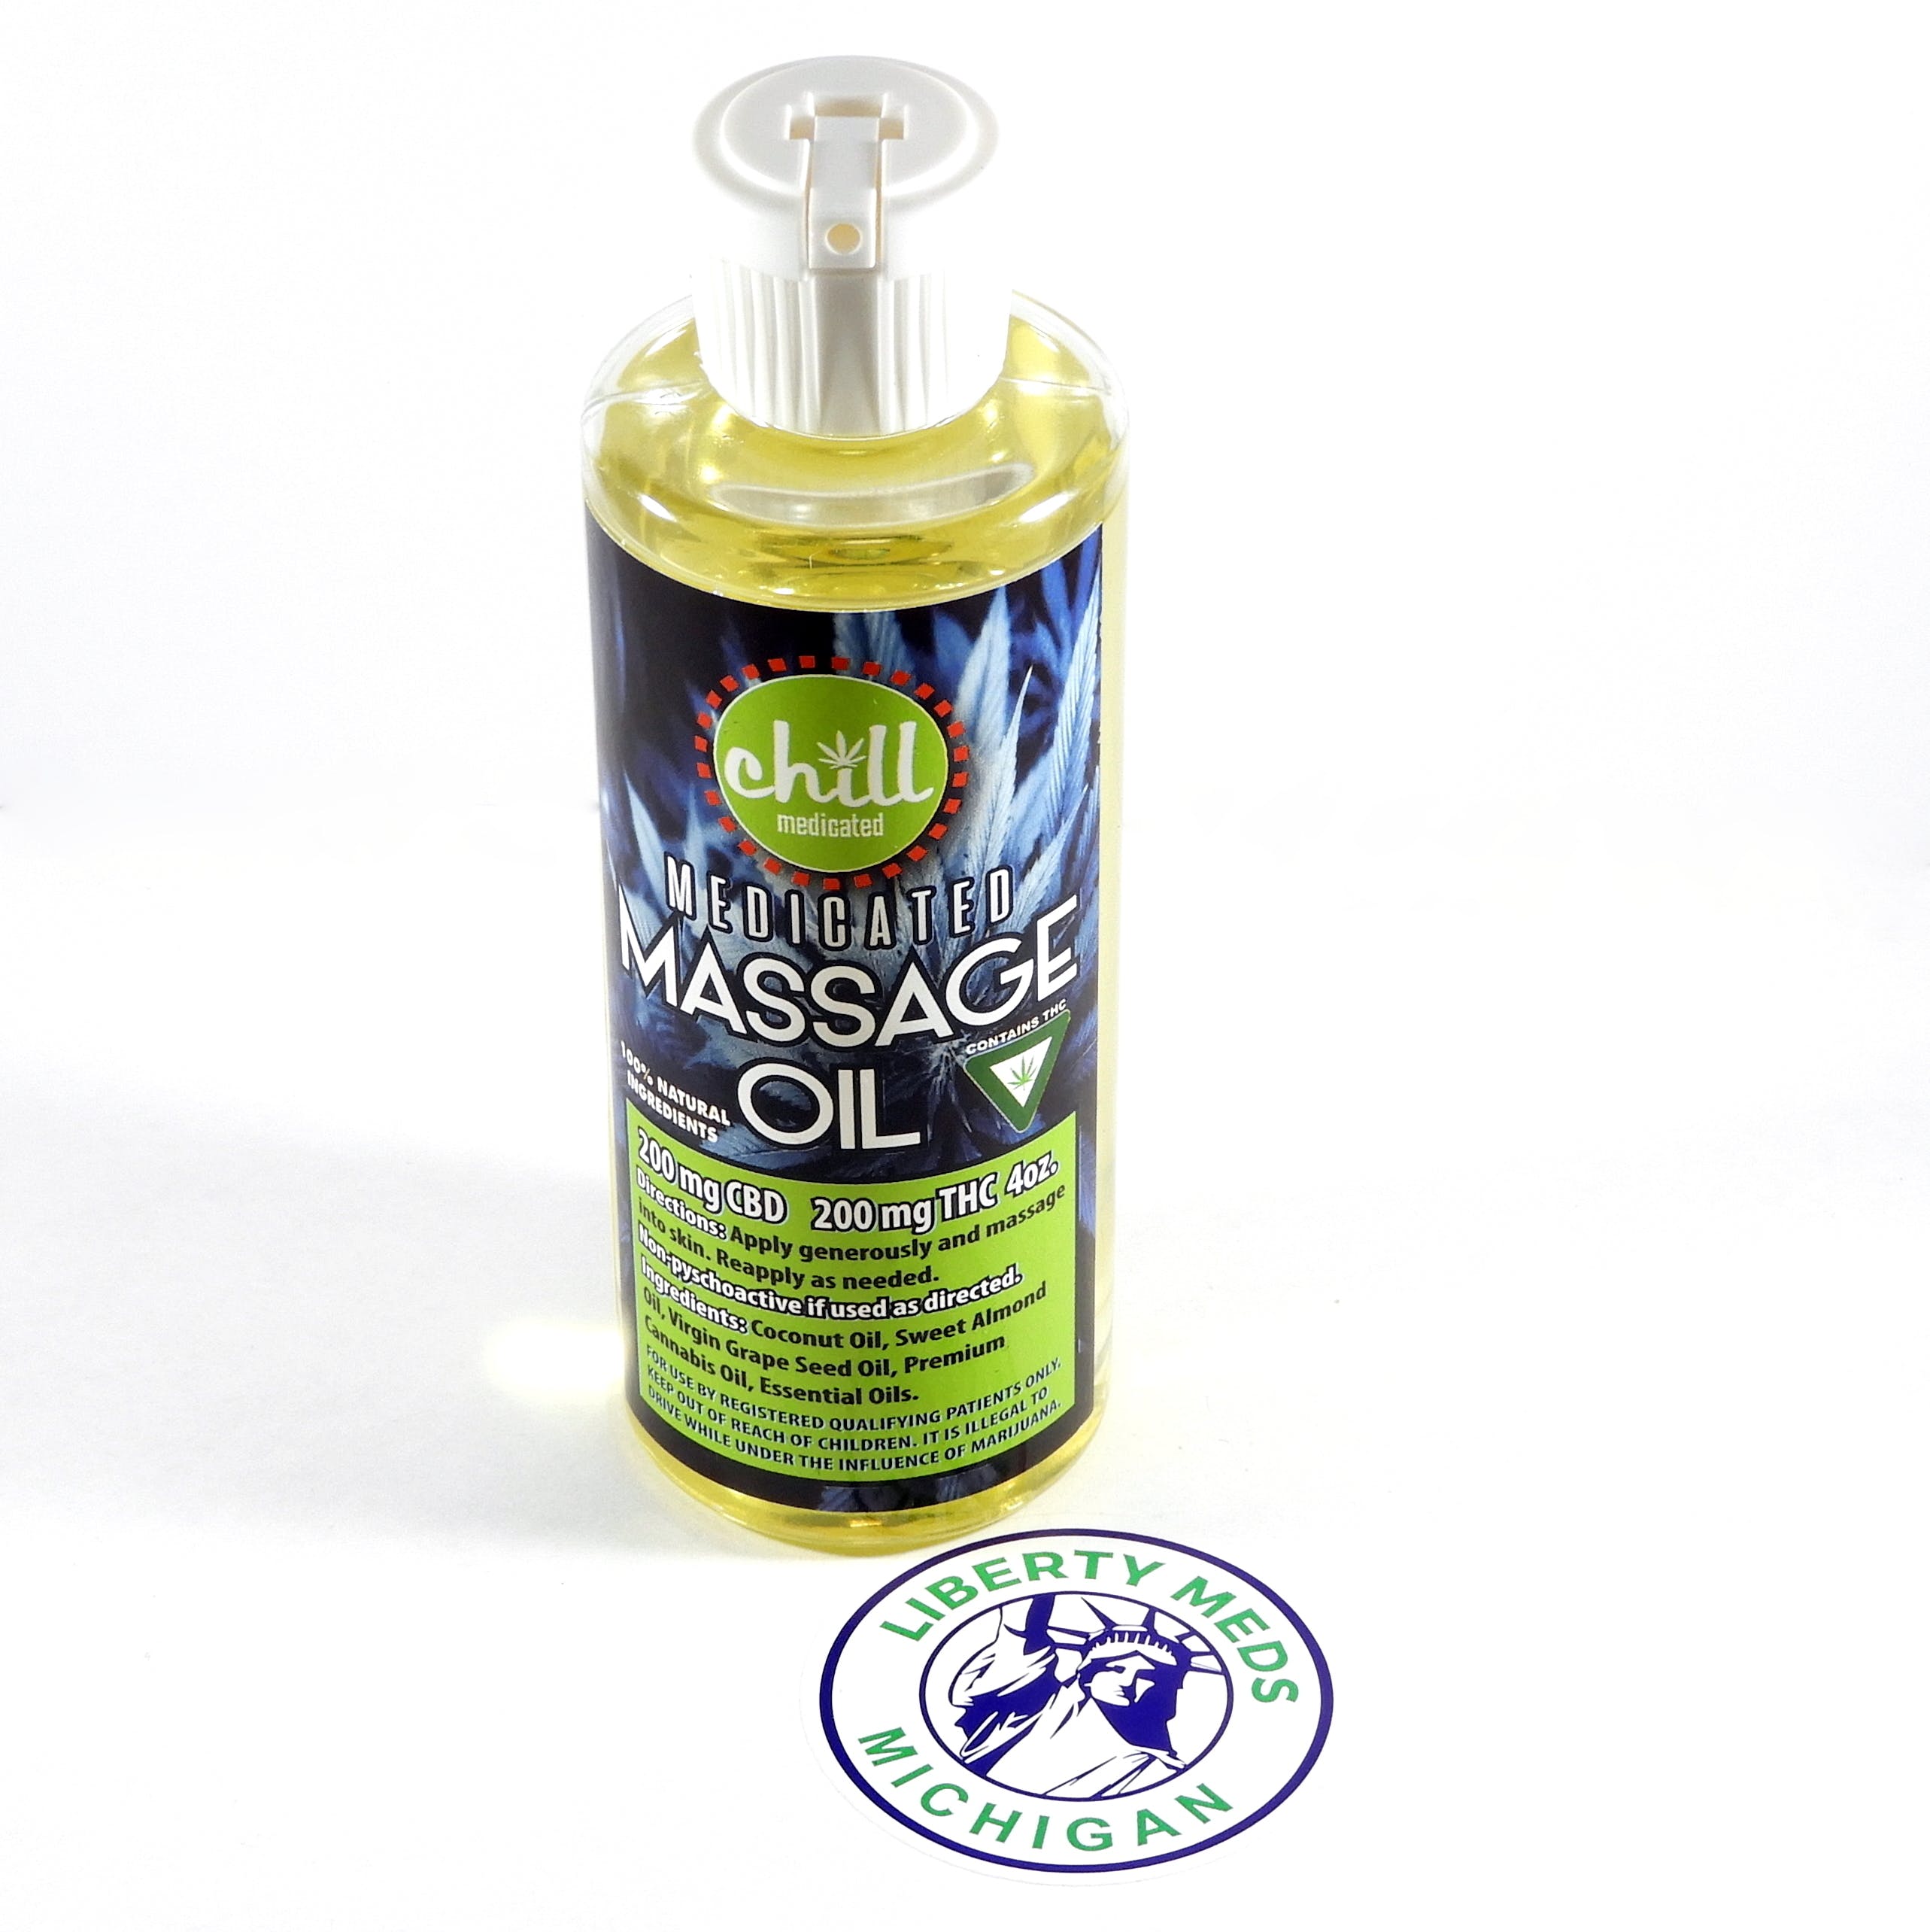 Chill Medicated Massage Oil : Orange Peppermint